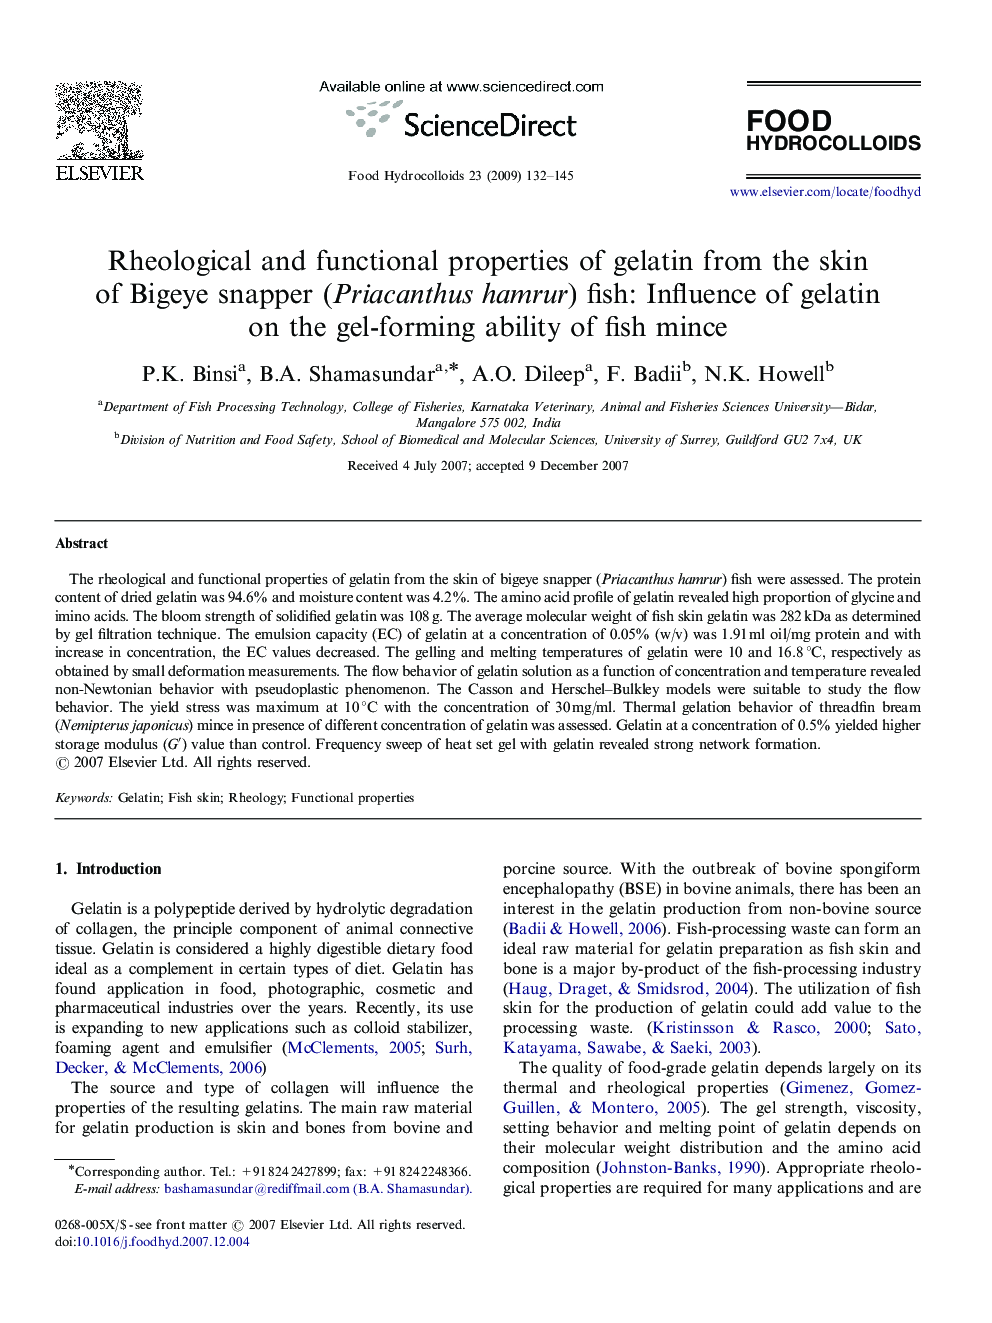 Rheological and functional properties of gelatin from the skin of Bigeye snapper (Priacanthus hamrur) fish: Influence of gelatin on the gel-forming ability of fish mince